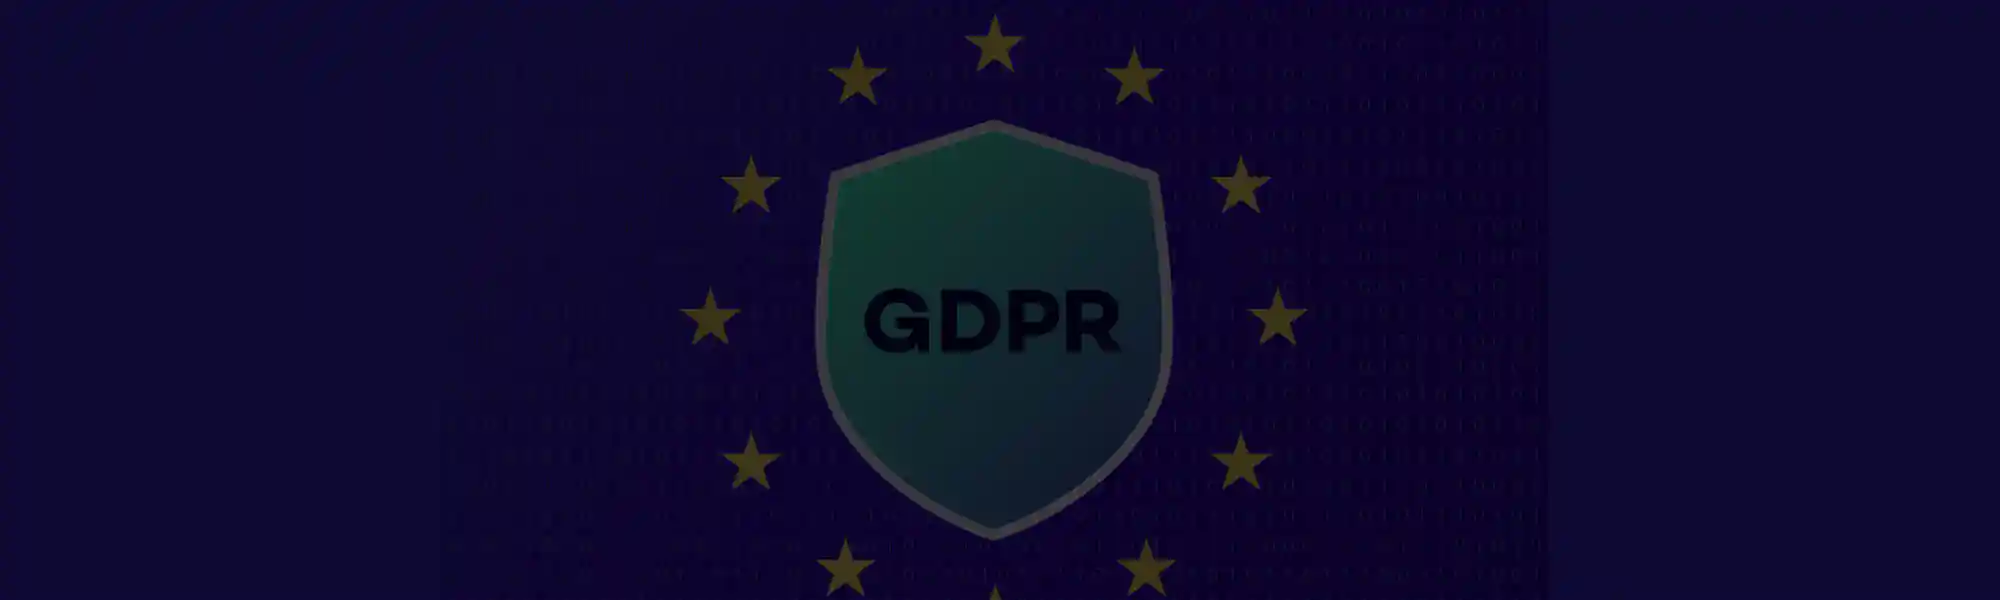 How to leverage GDPR for an open web